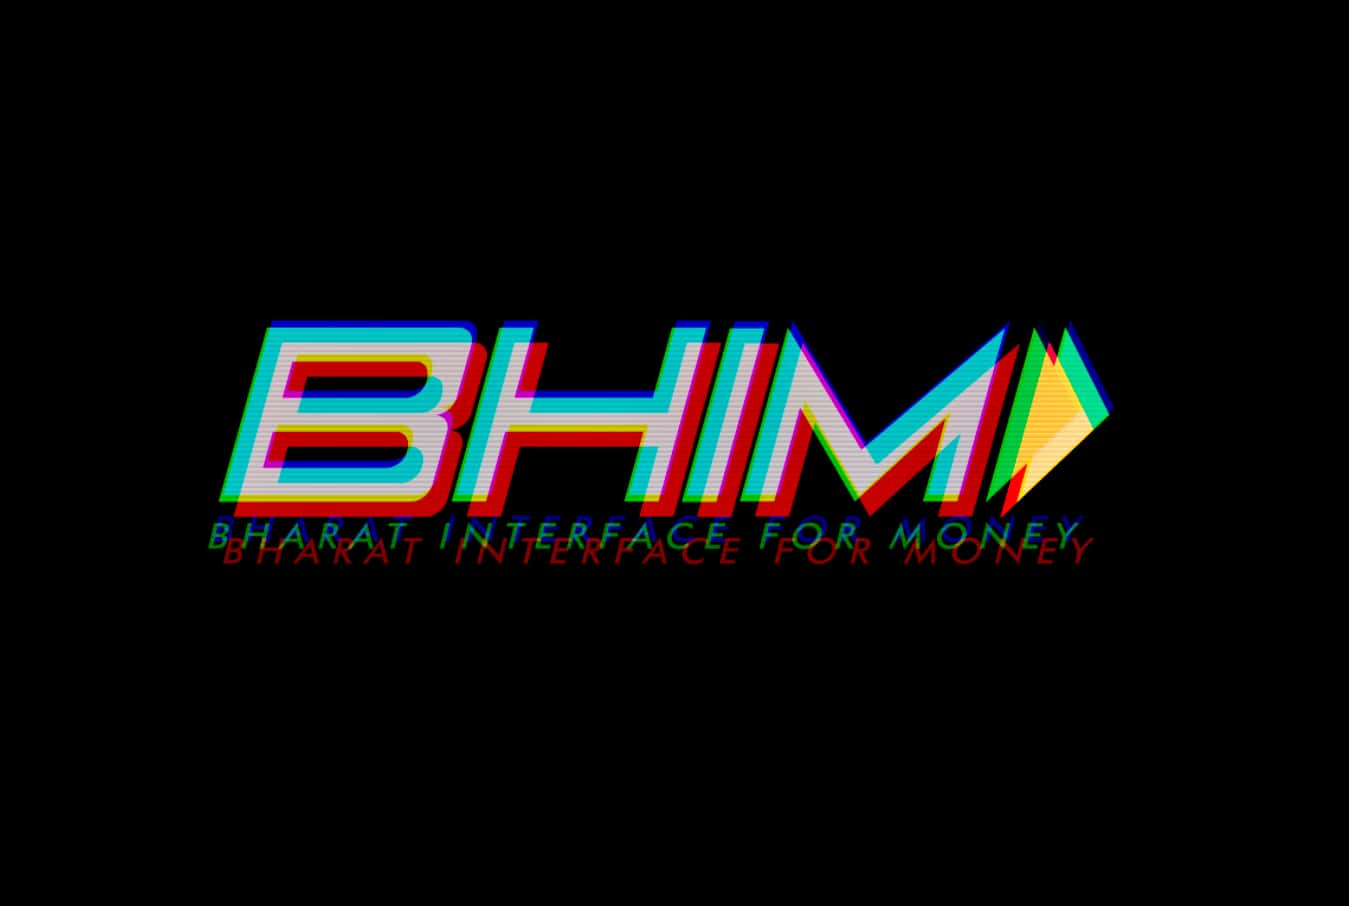 Mobile payment app BHIM leaked financial data of 7 million Indians